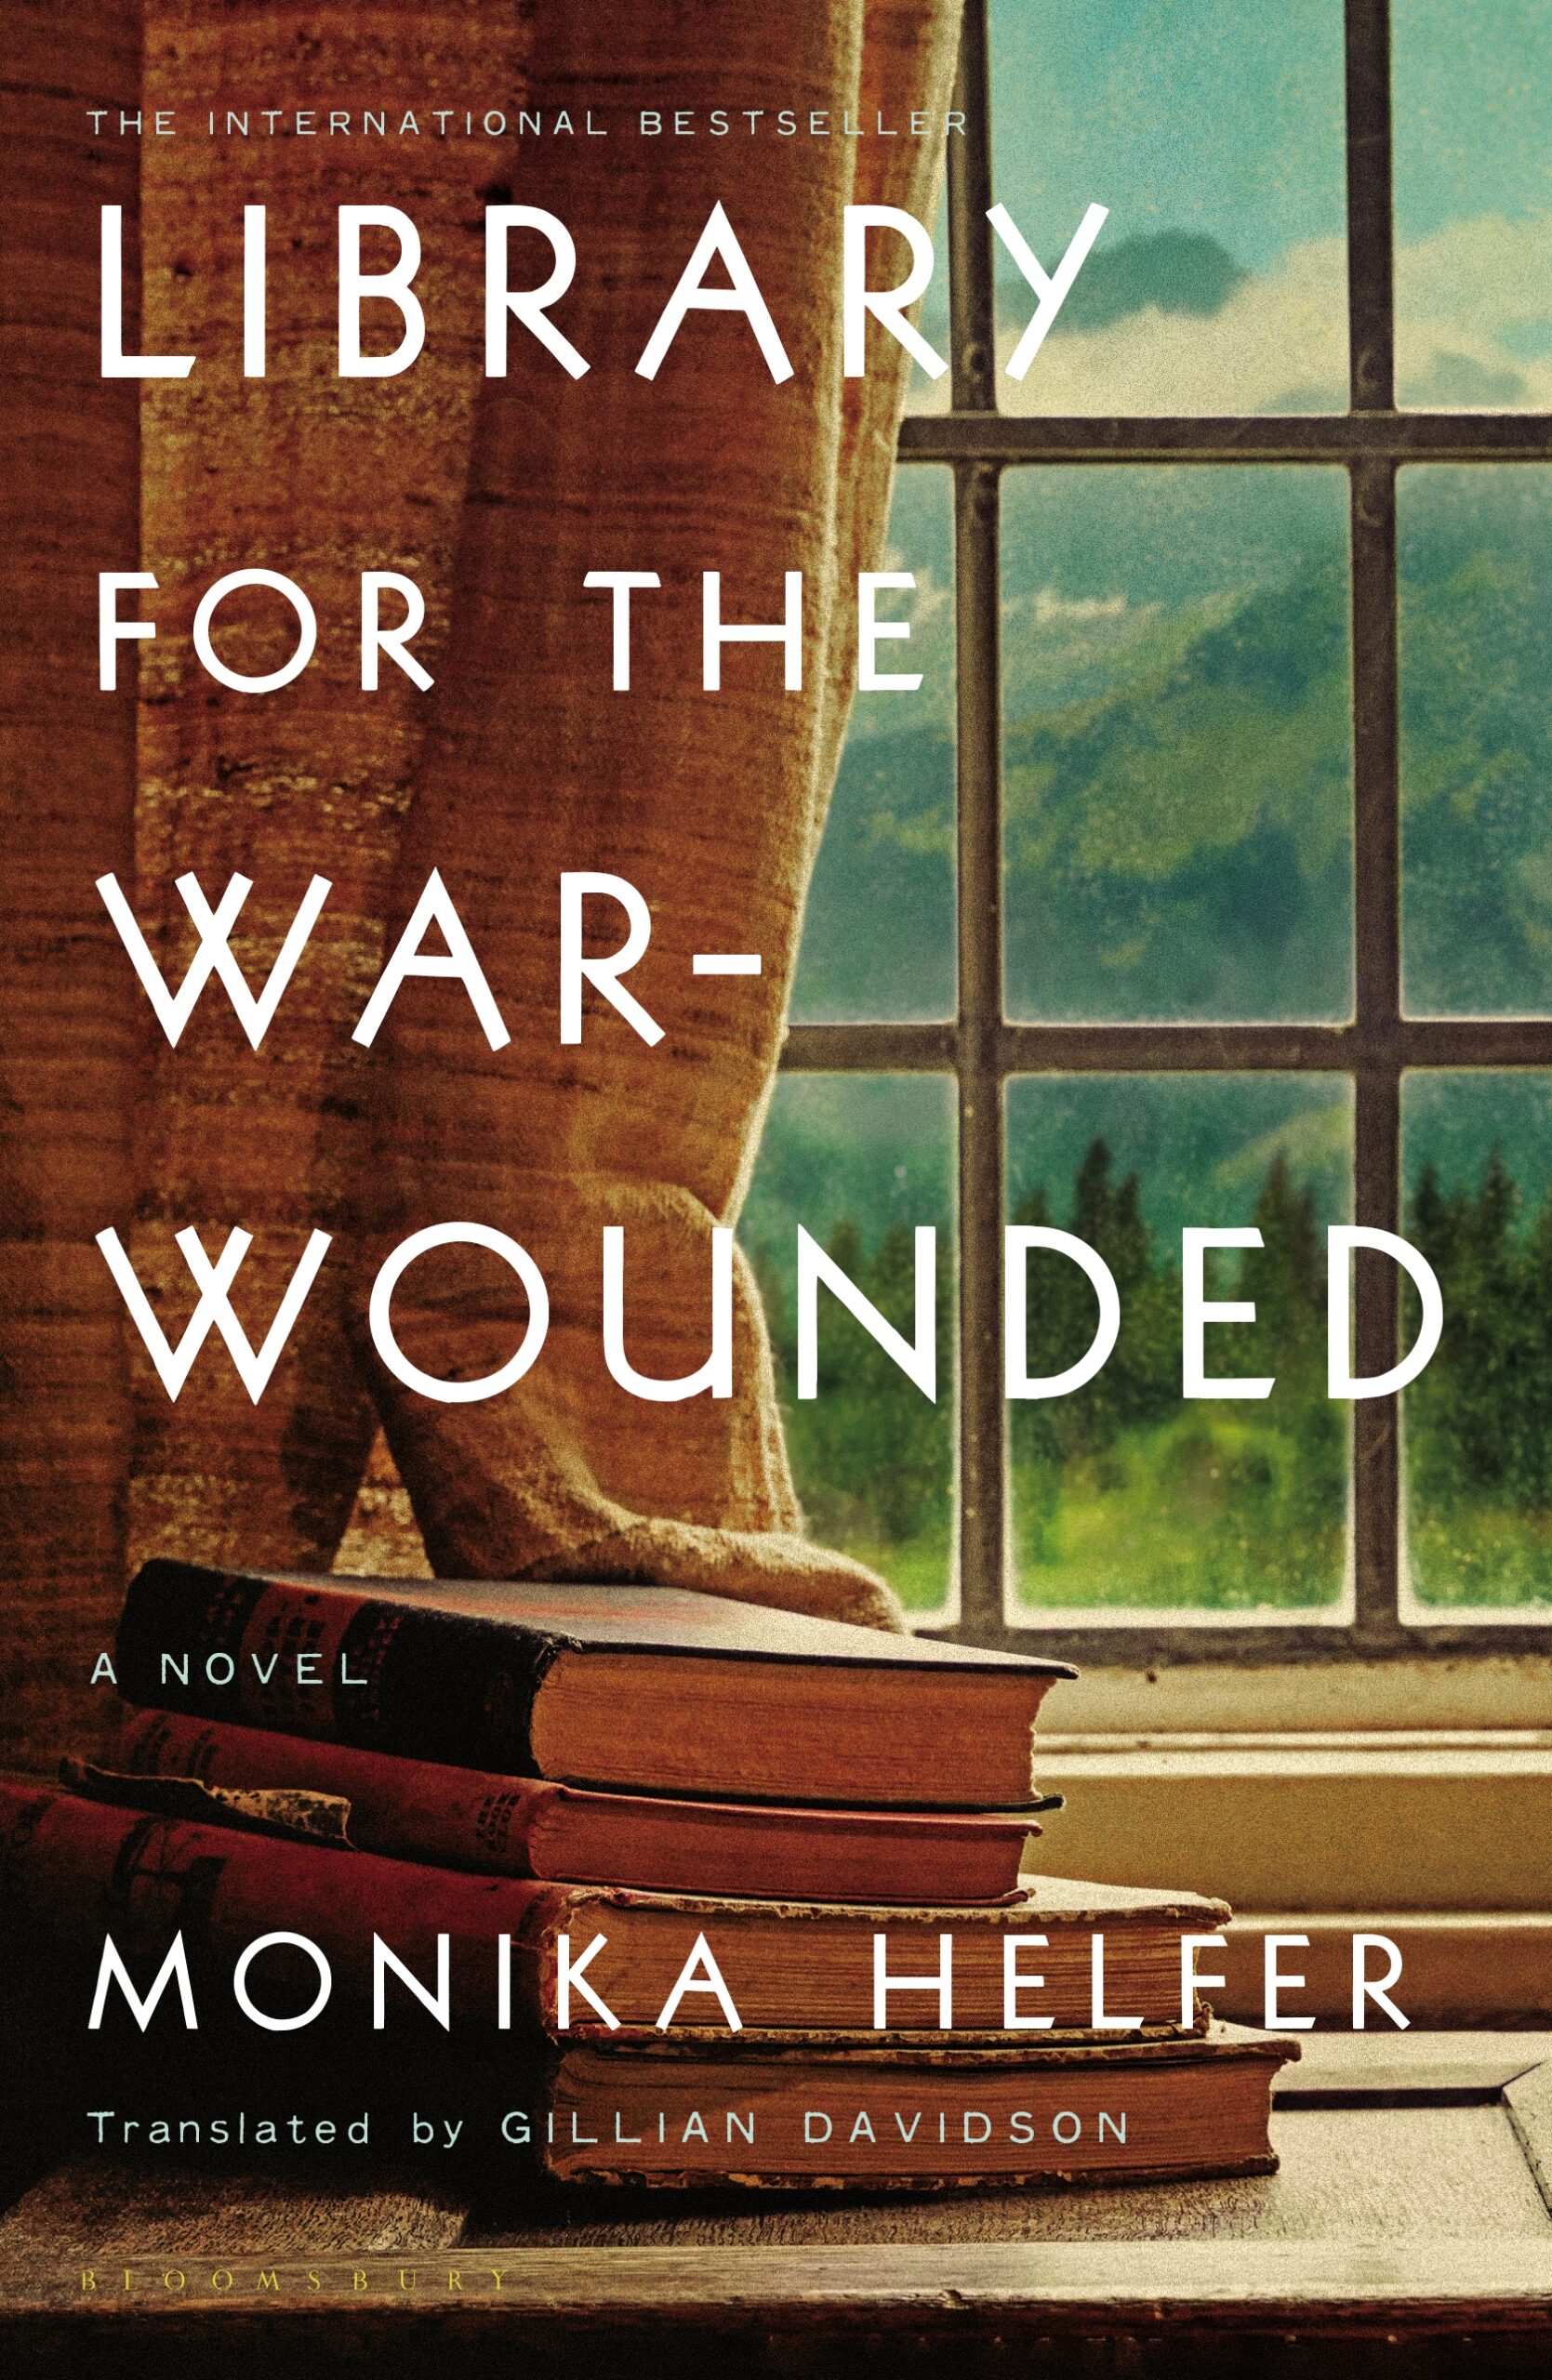 One of our recommended books is Library for the War-Wounded by Monika Helfer